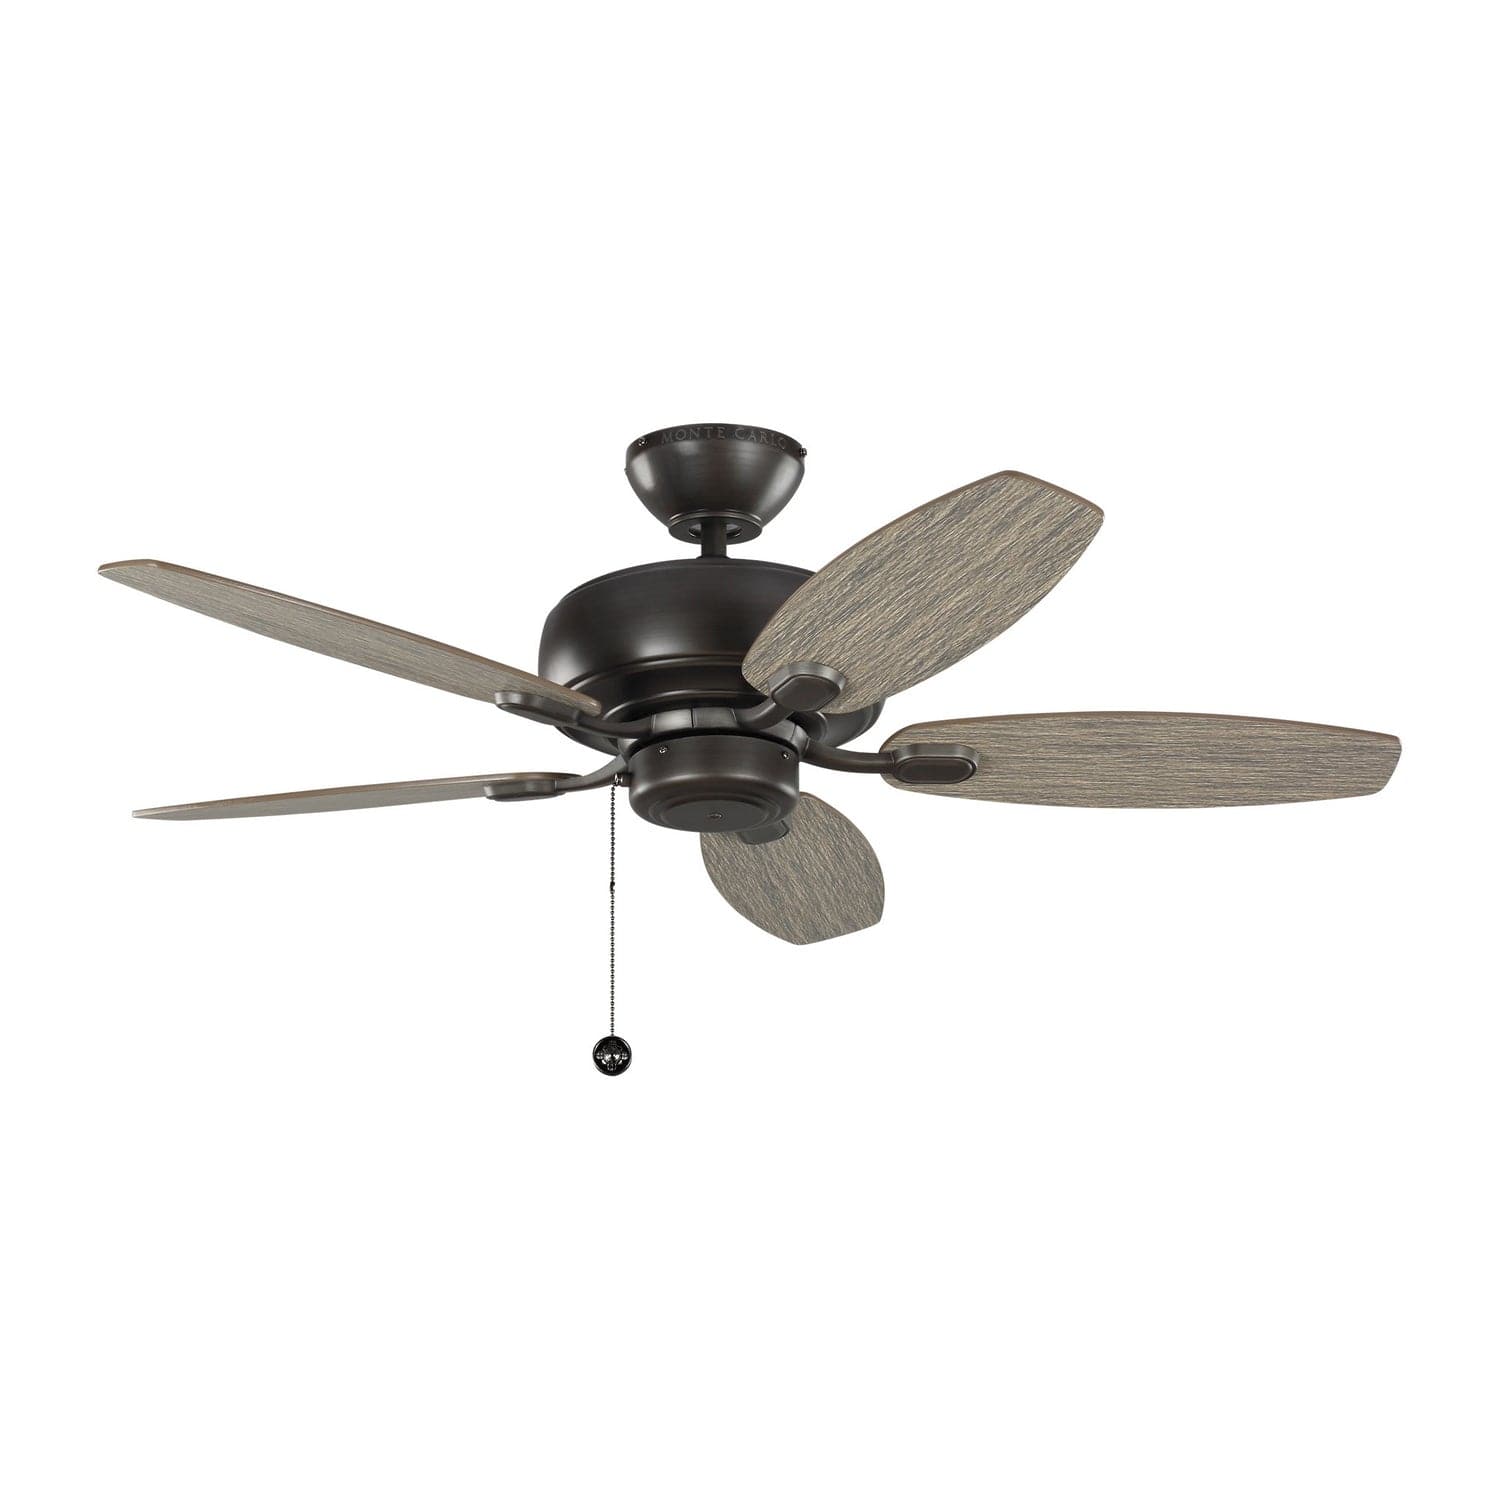 Generation Lighting. - 5CQM44AGP - 44``Ceiling Fan - Centro 44 - Aged Pewter